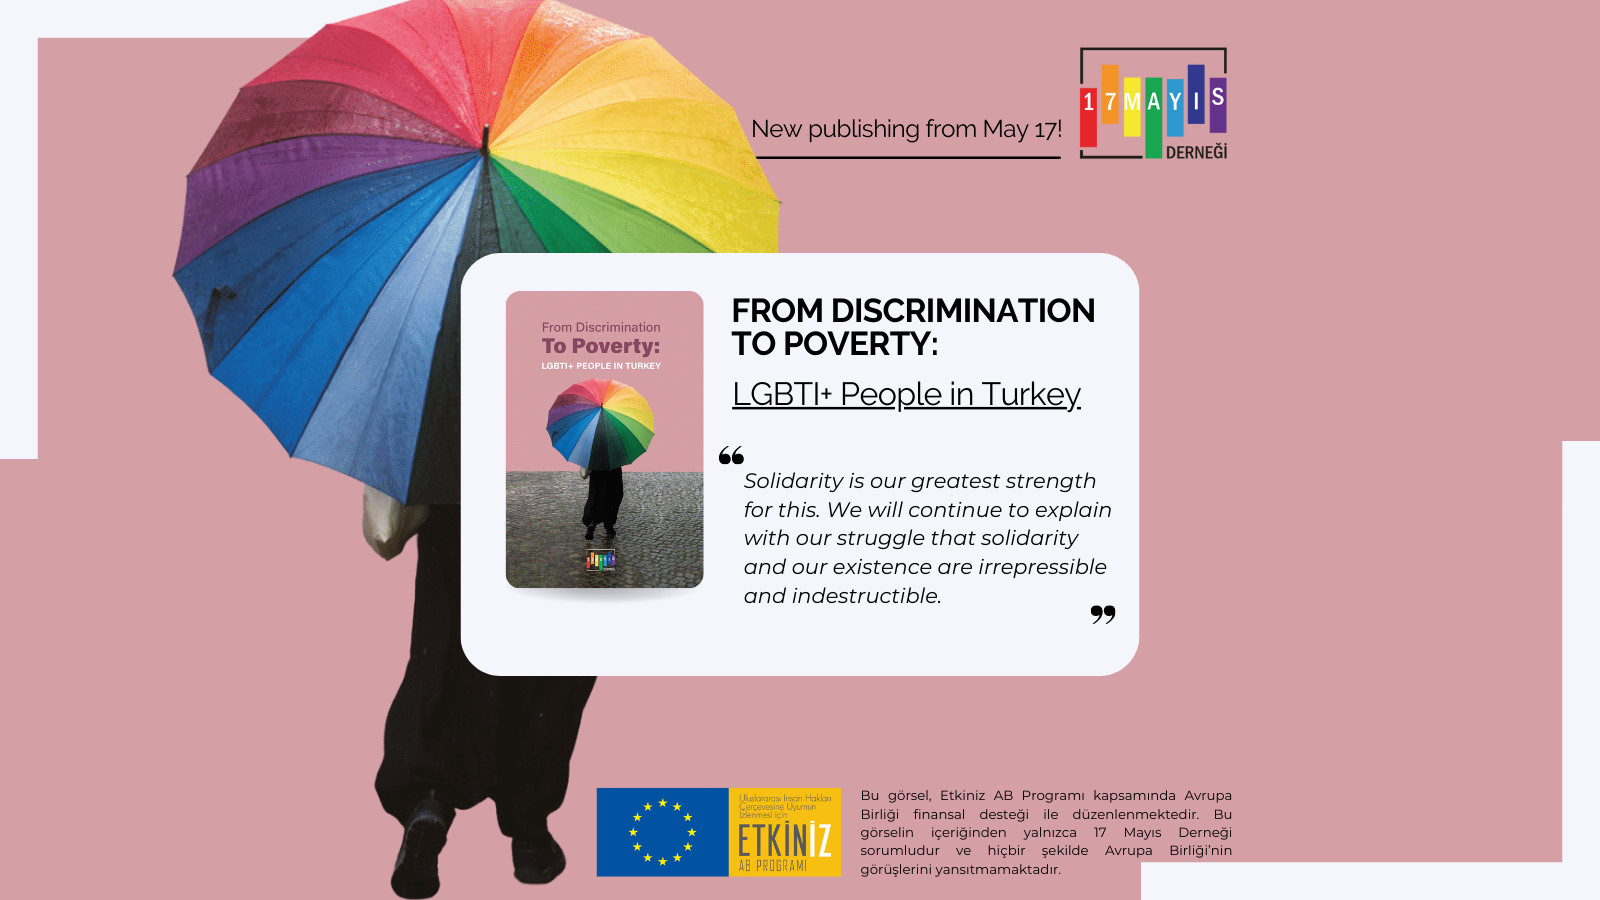 New Report: "From Discrimination to Poverty: LGBTI+'s in Turkey" - May 17 Association